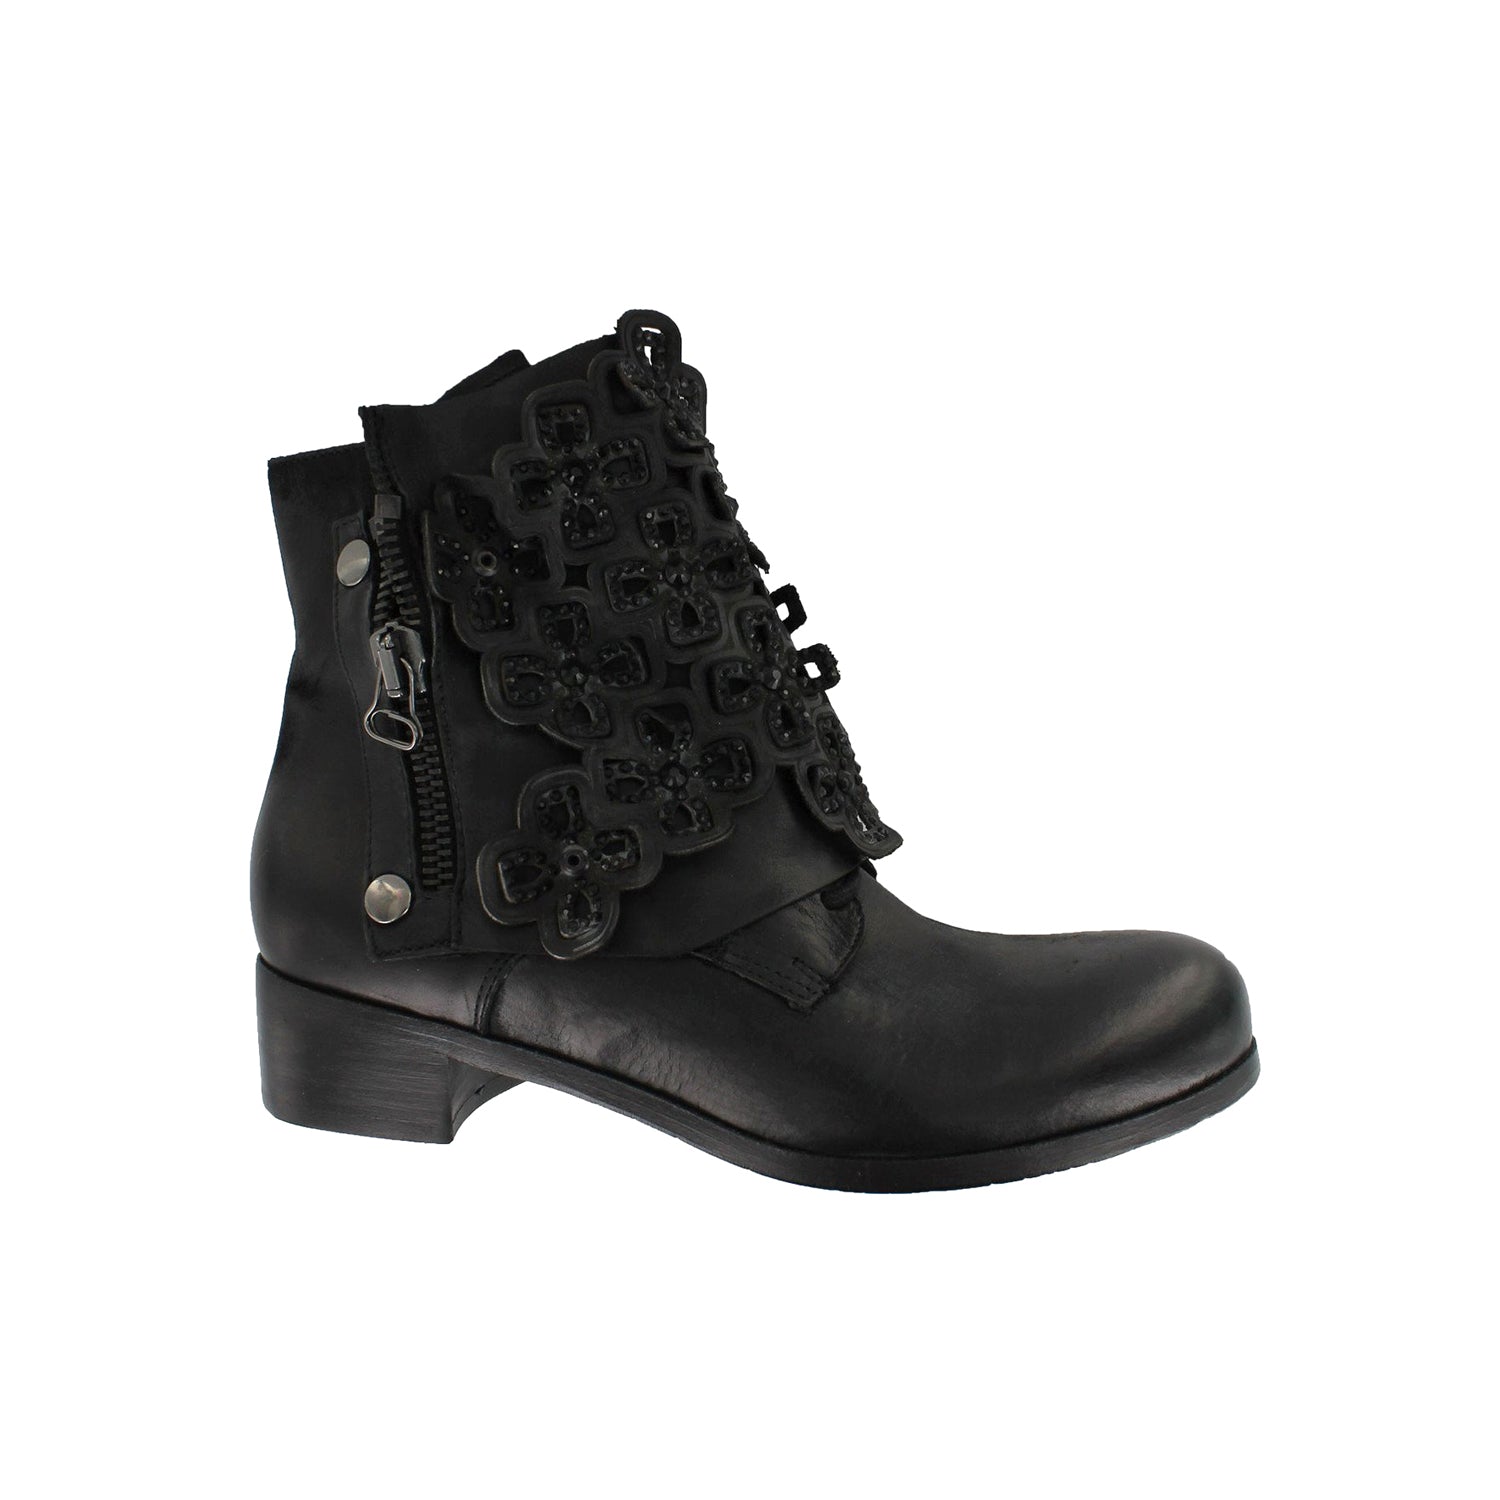 3577X51- Black Ankle Boot With Flower Pattern